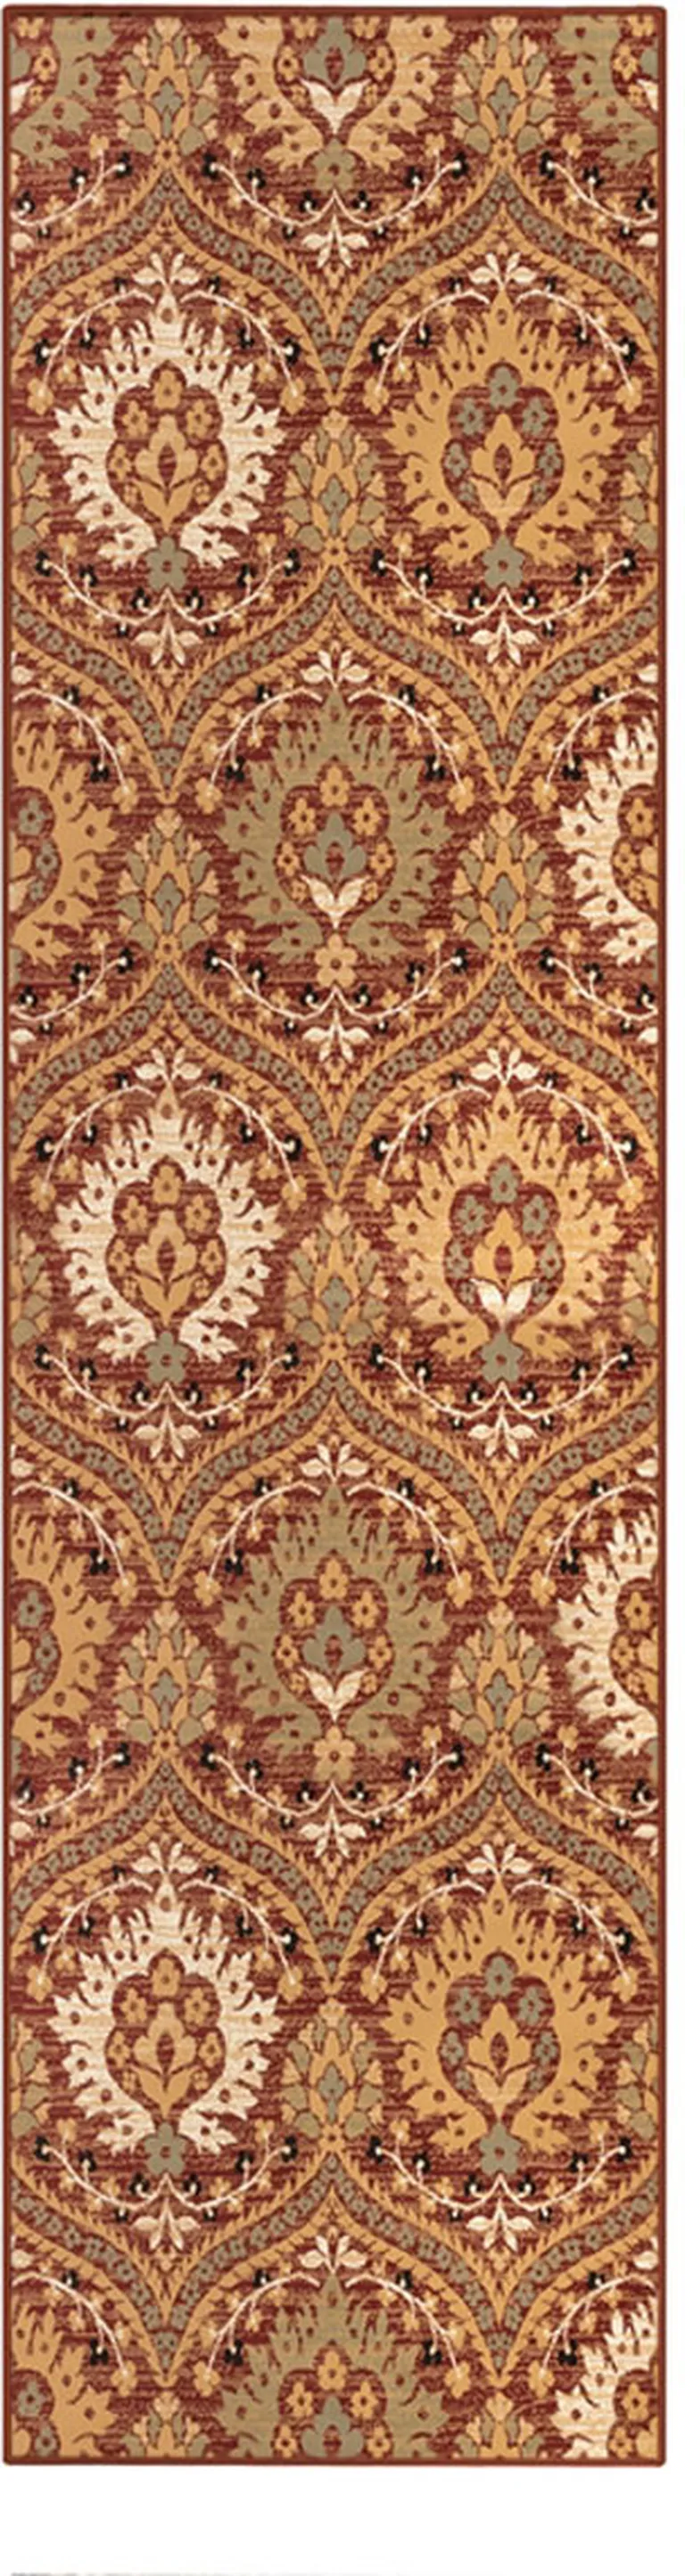 8' Red Gold And Olive Floral Stain Resistant Runner Rug Photo 1